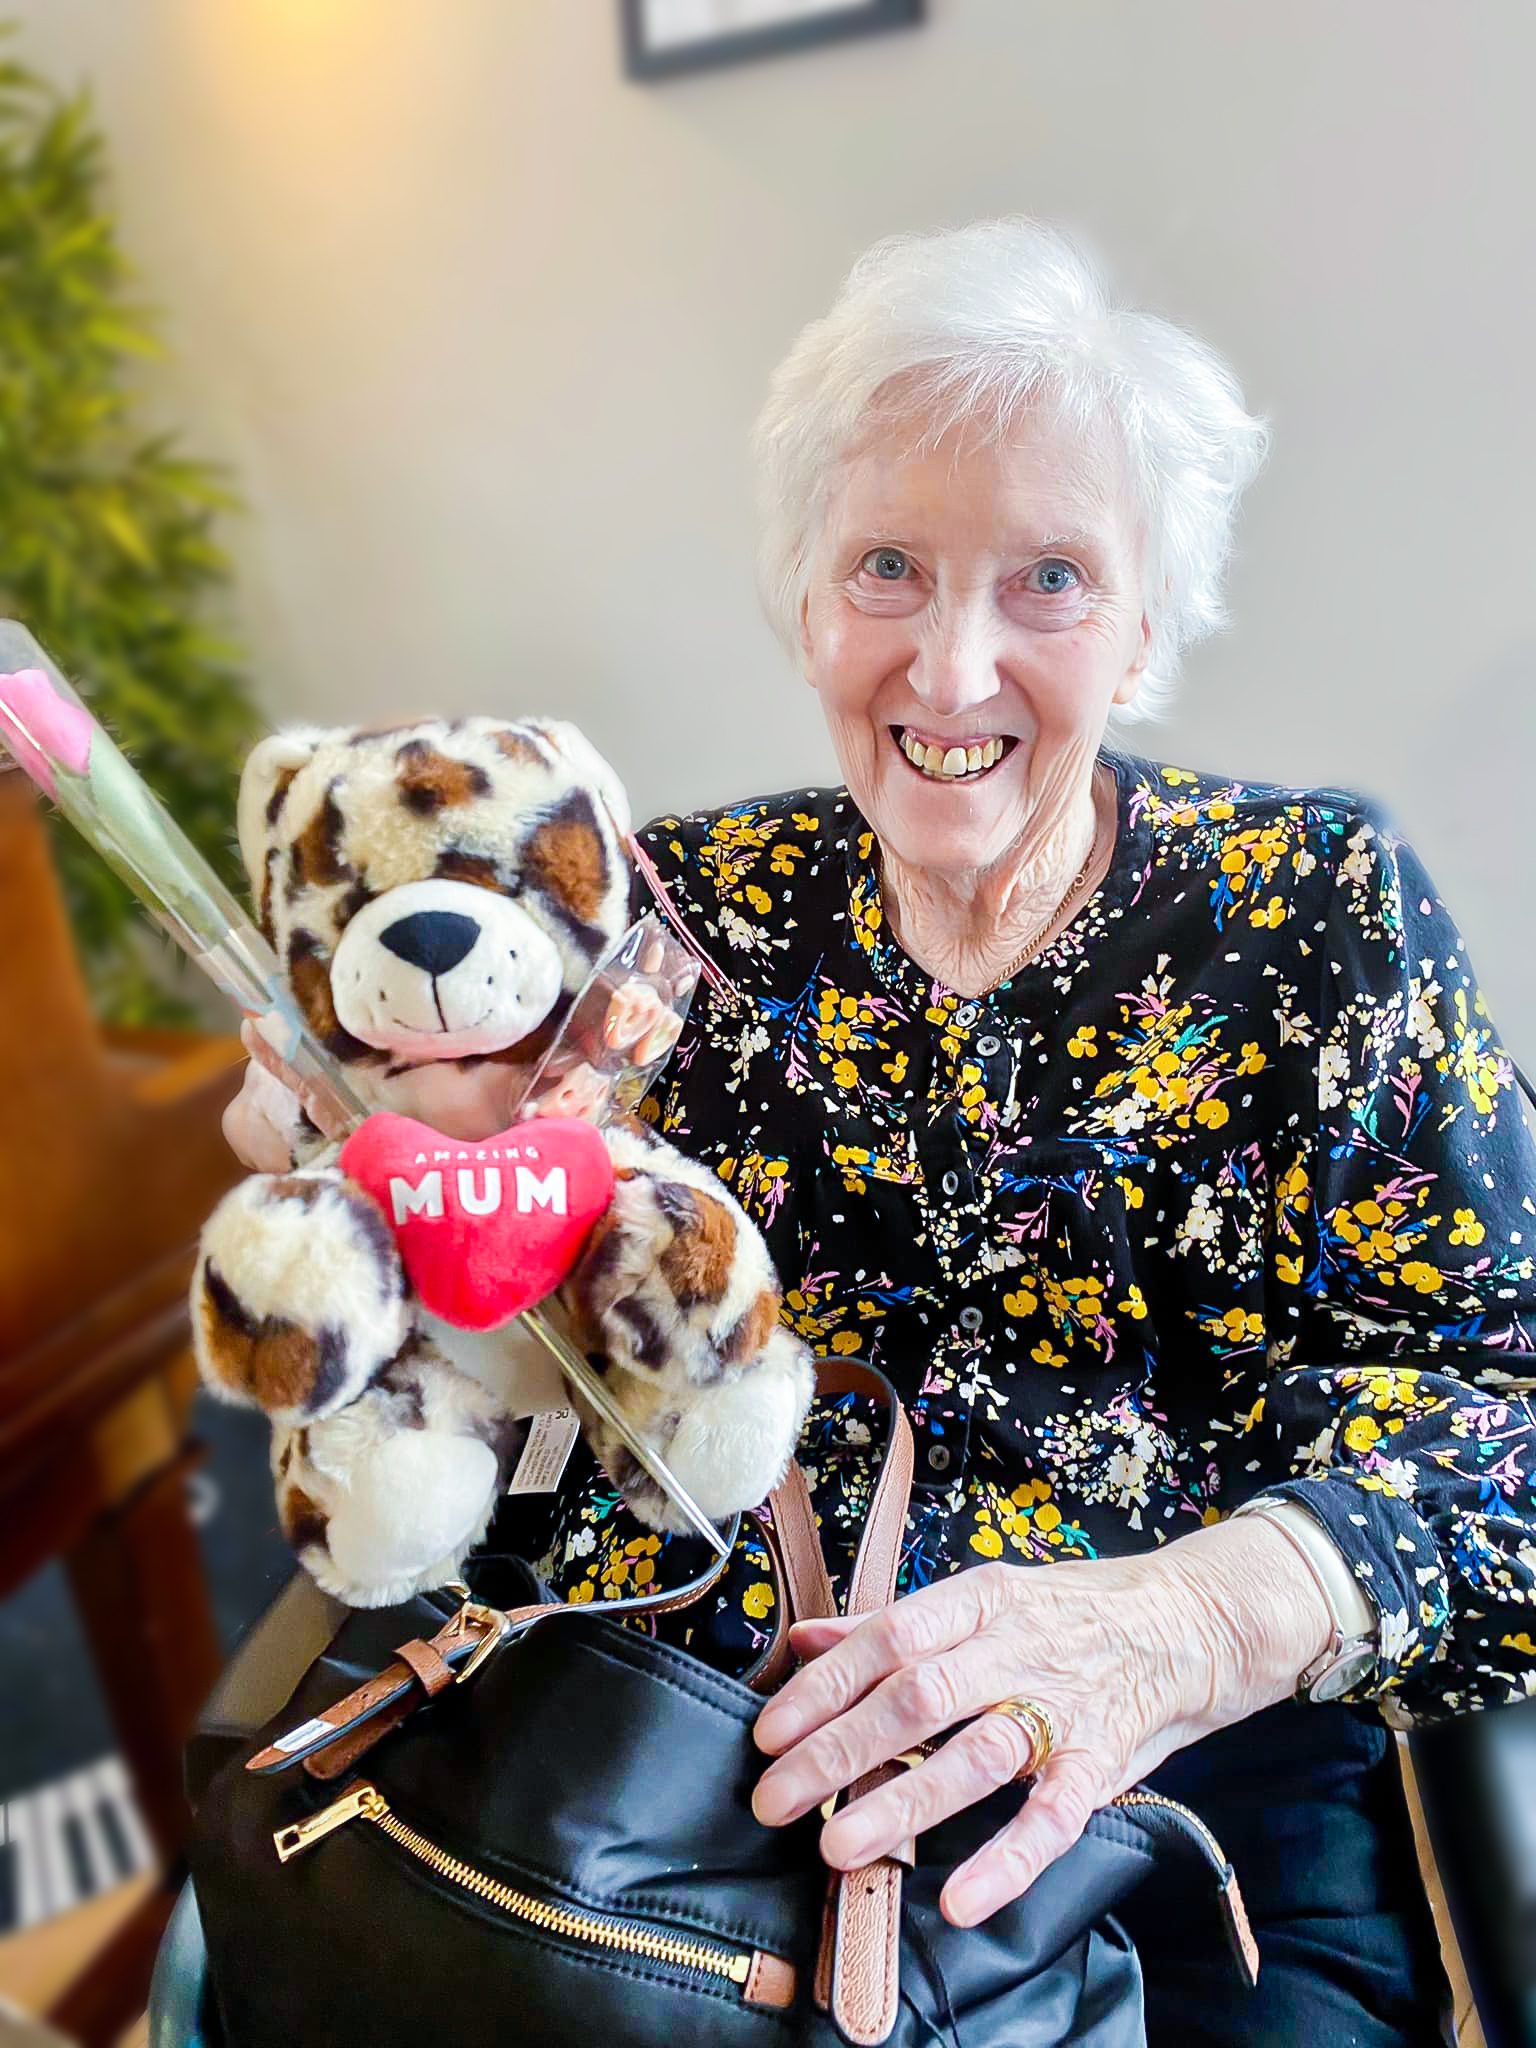 March highlights: A Bernard Sunley resident holding a Mother's Day gift